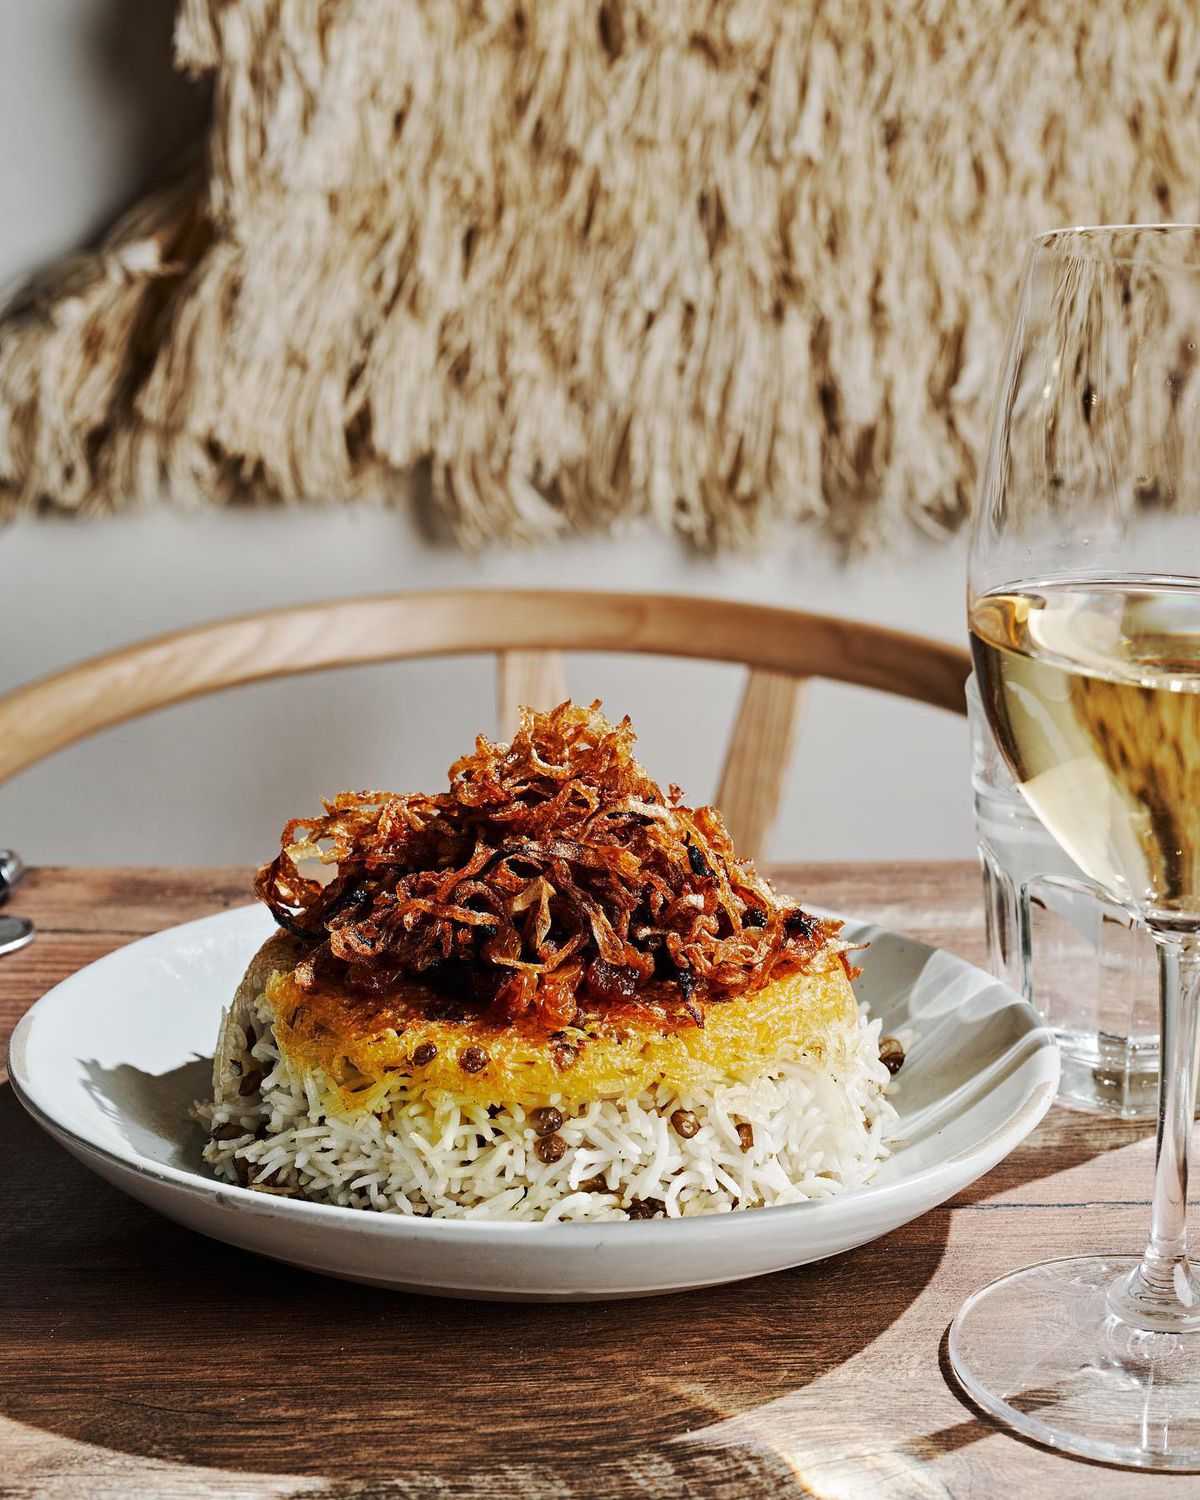 Adas polo, a traditional Persian lentil rice dish made with a rice crust called tahdig from Delbar in Atlanta.